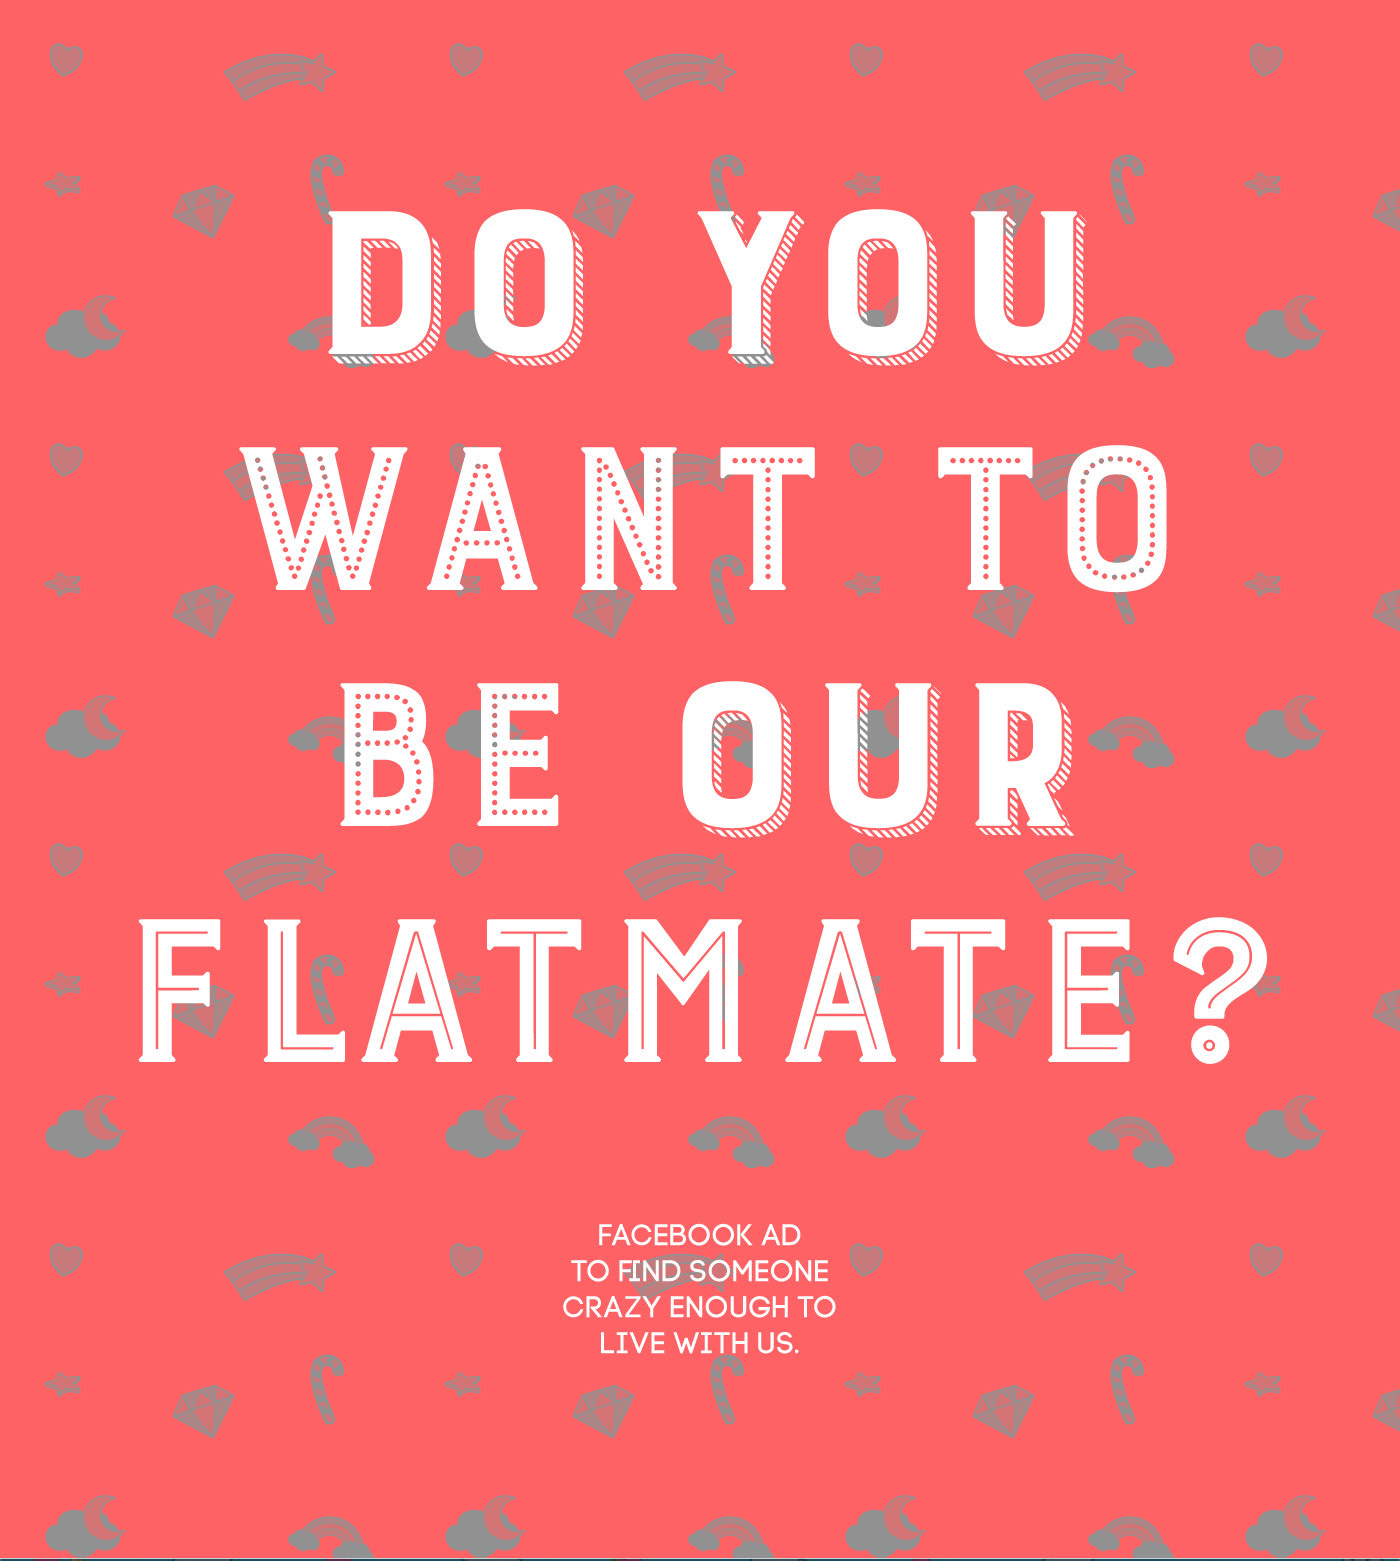 flatmate video Facebook Ad Love sharing openness community